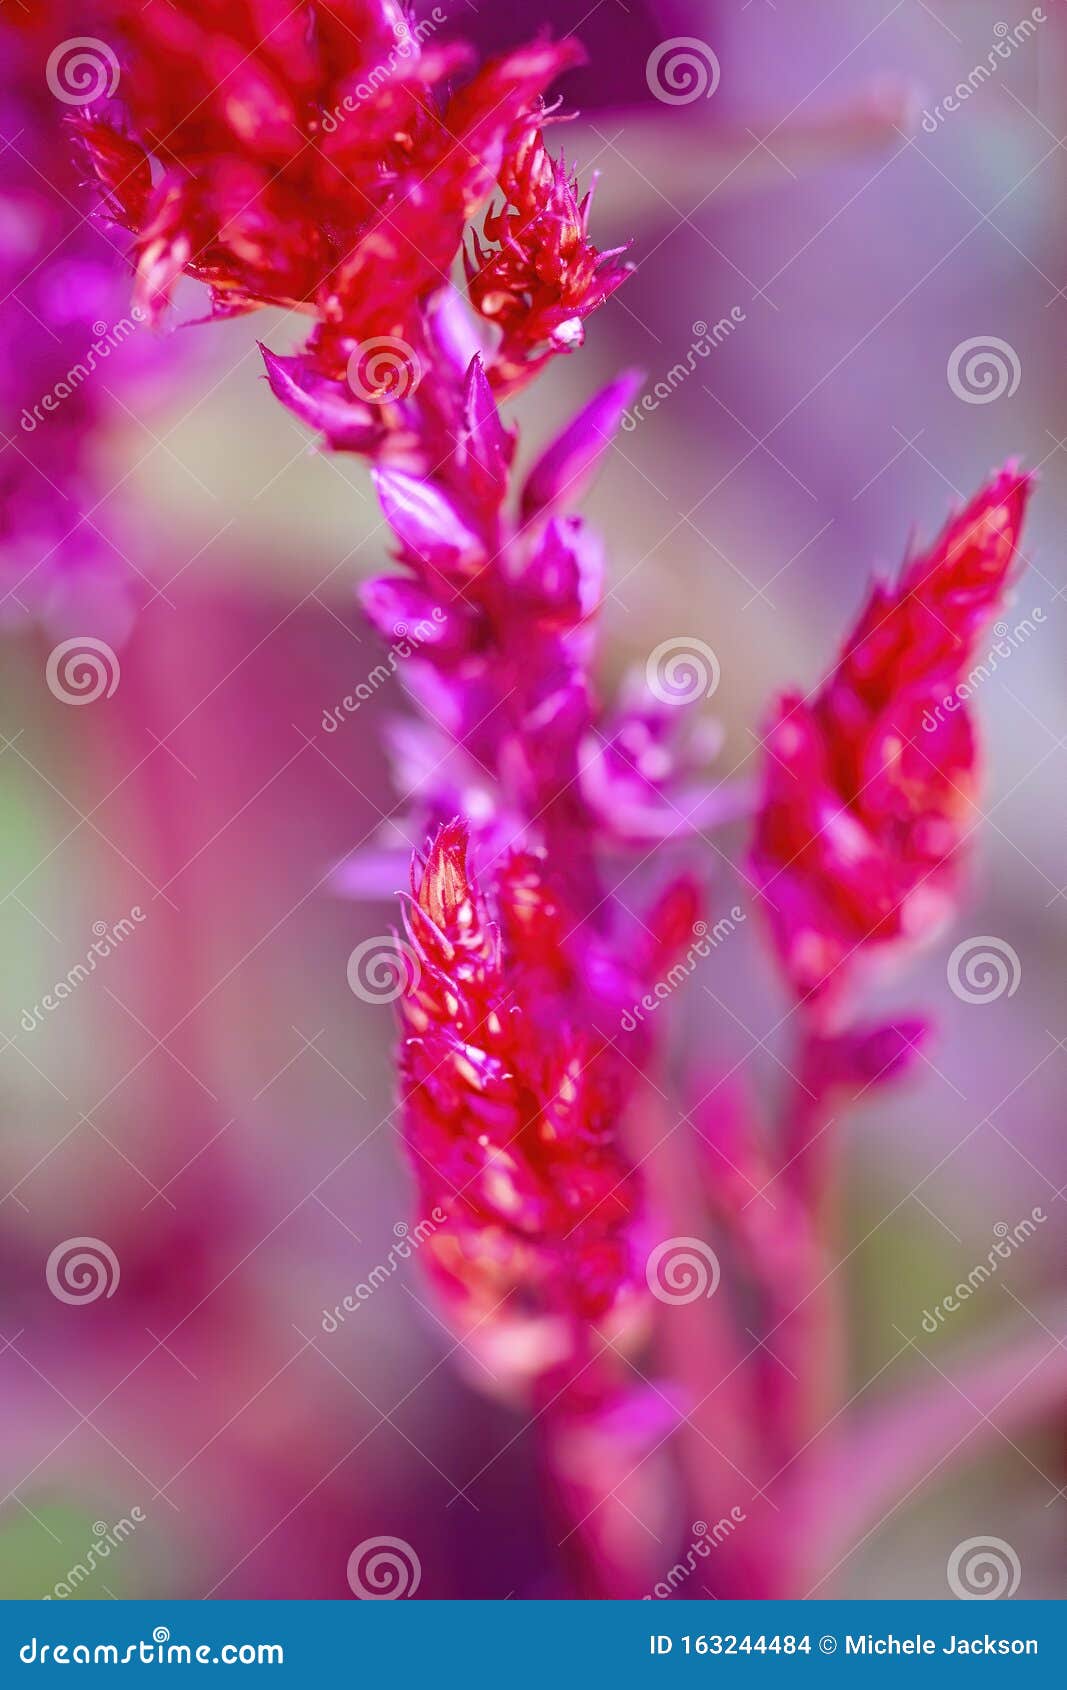 8 142 Breath Plant Photos Free Royalty Free Stock Photos From Dreamstime